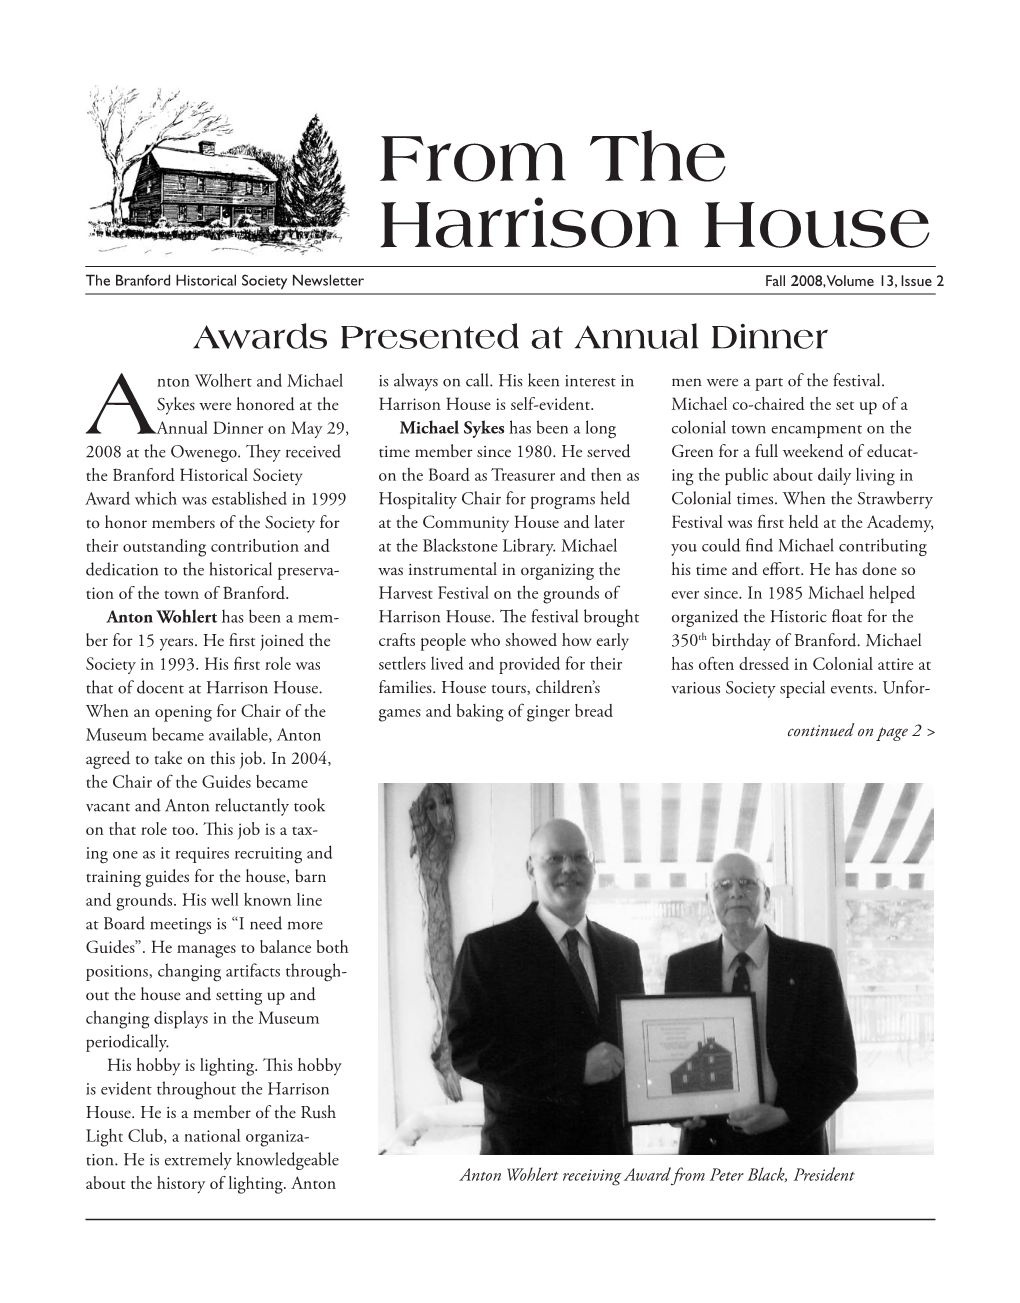 From the Harrison House the Branford Historical Society Newsletter Fall 2008, Volume 13, Issue 2 Awards Presented at Annual Dinner